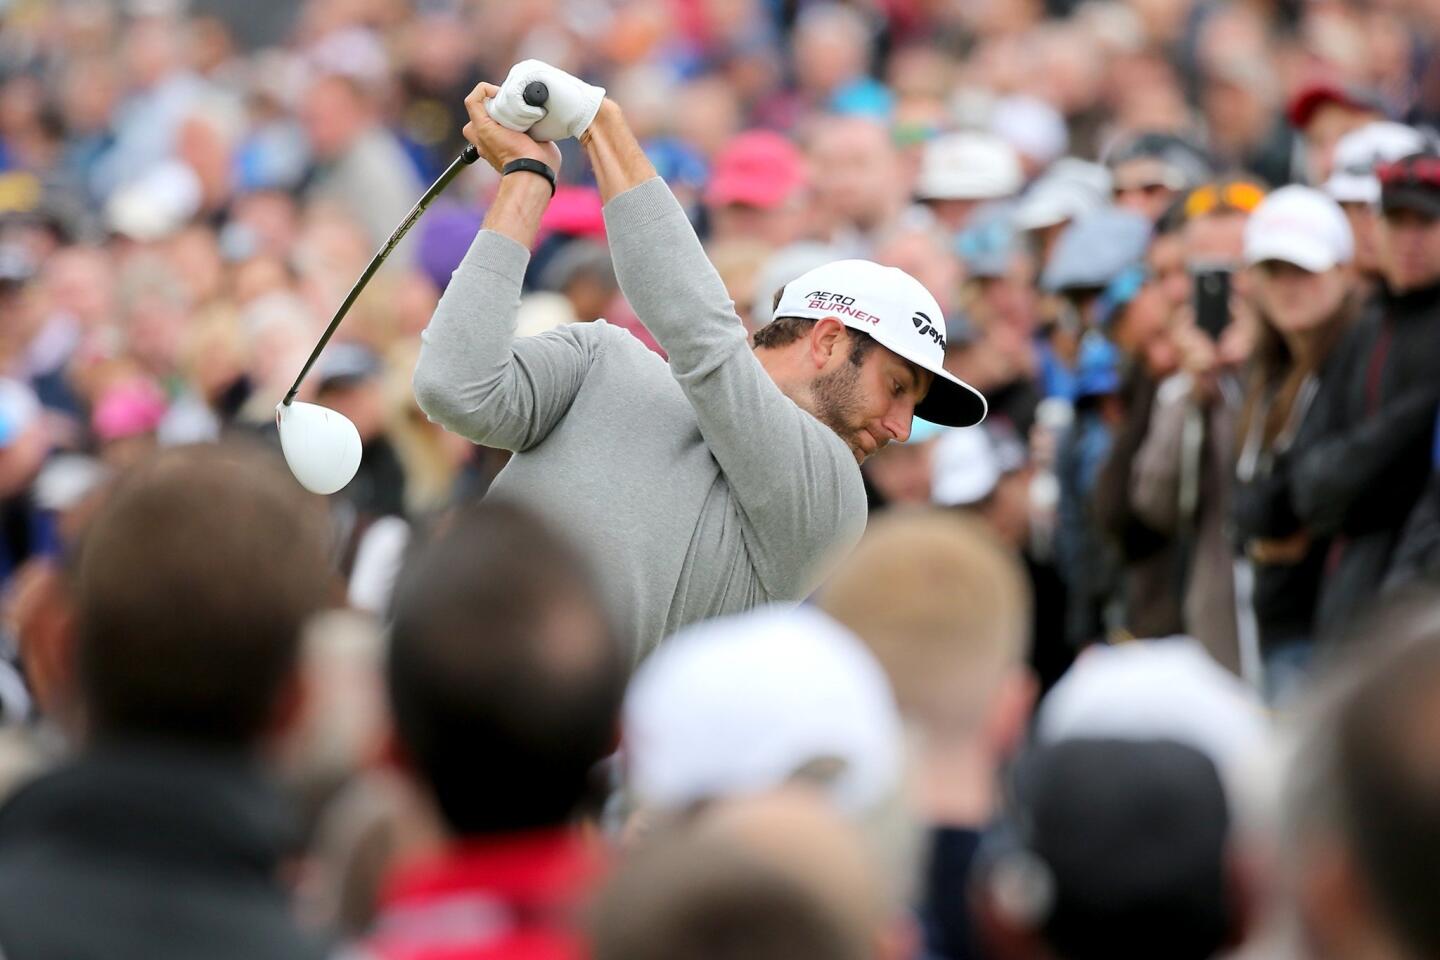 144th British Open at St. Andrews